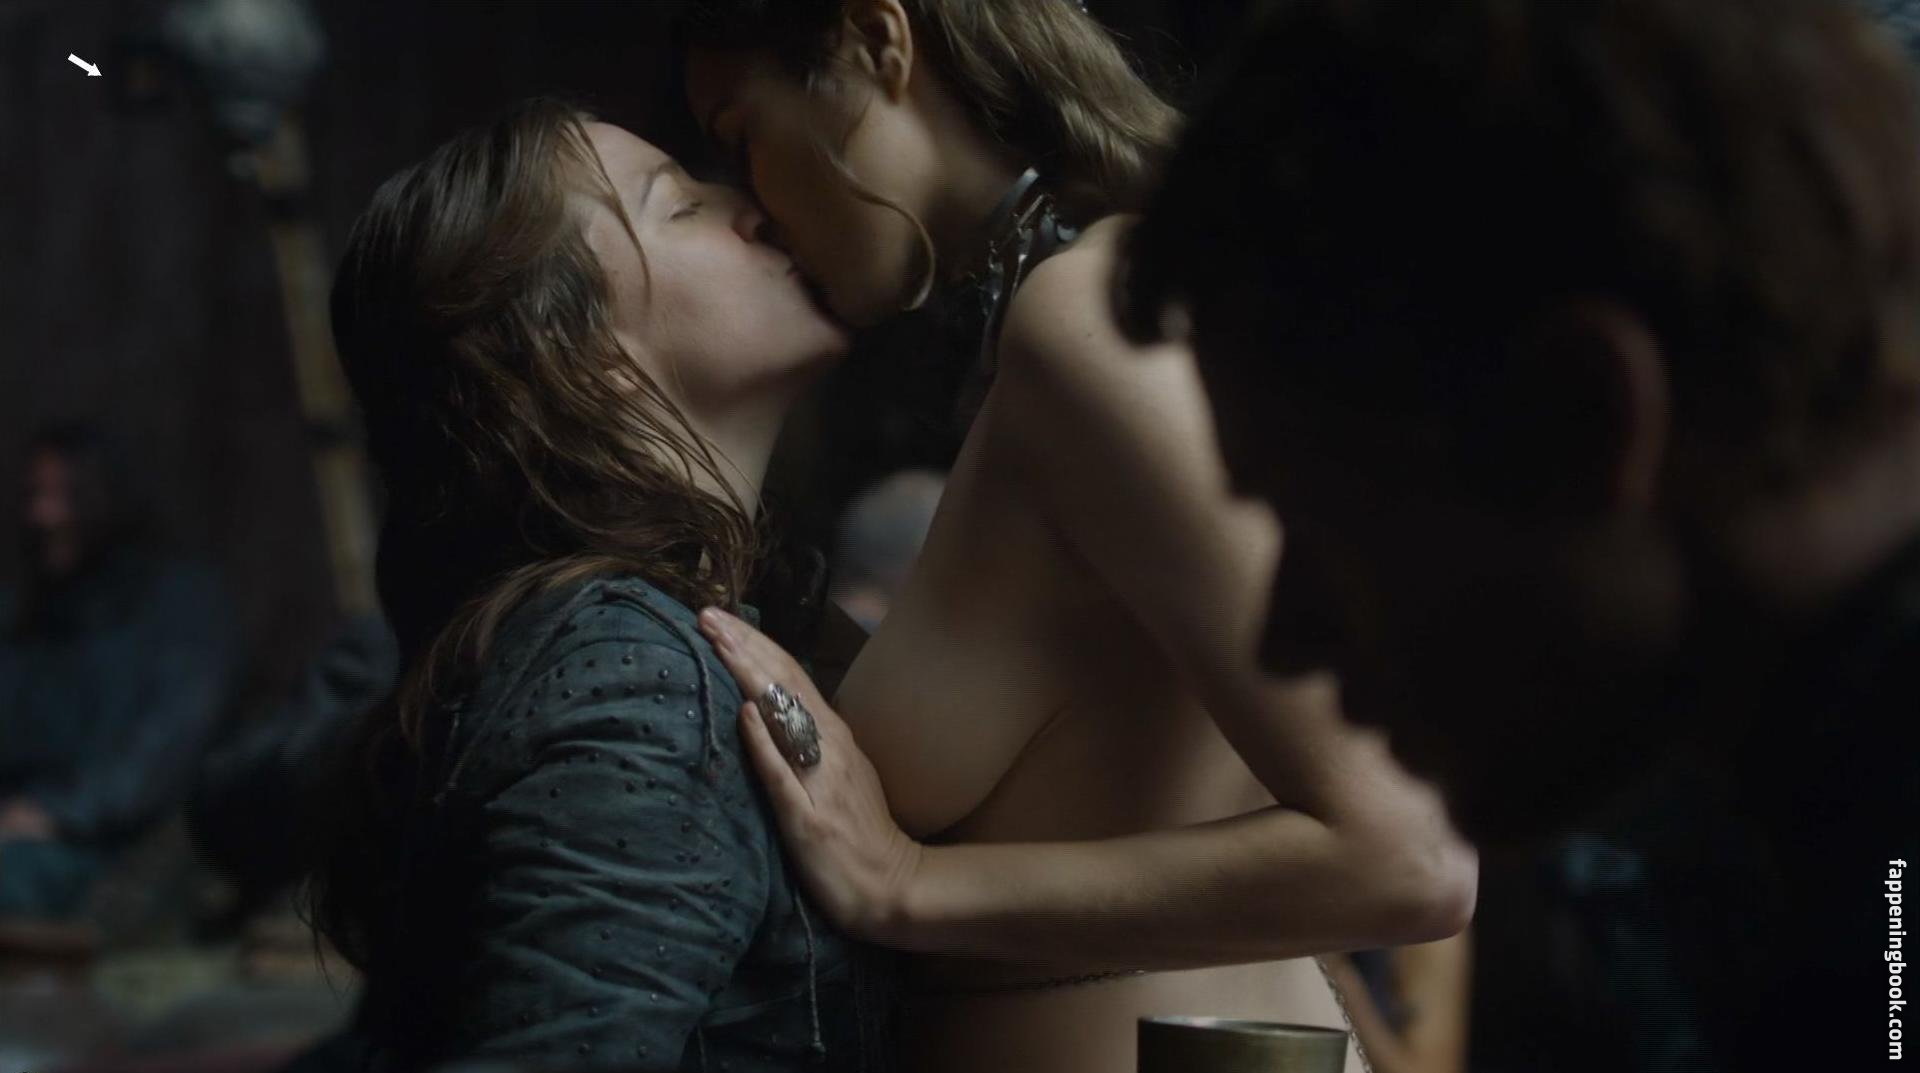 Gemma Whelan Nude, The Fappening - Photo #196362 - FappeningBook.